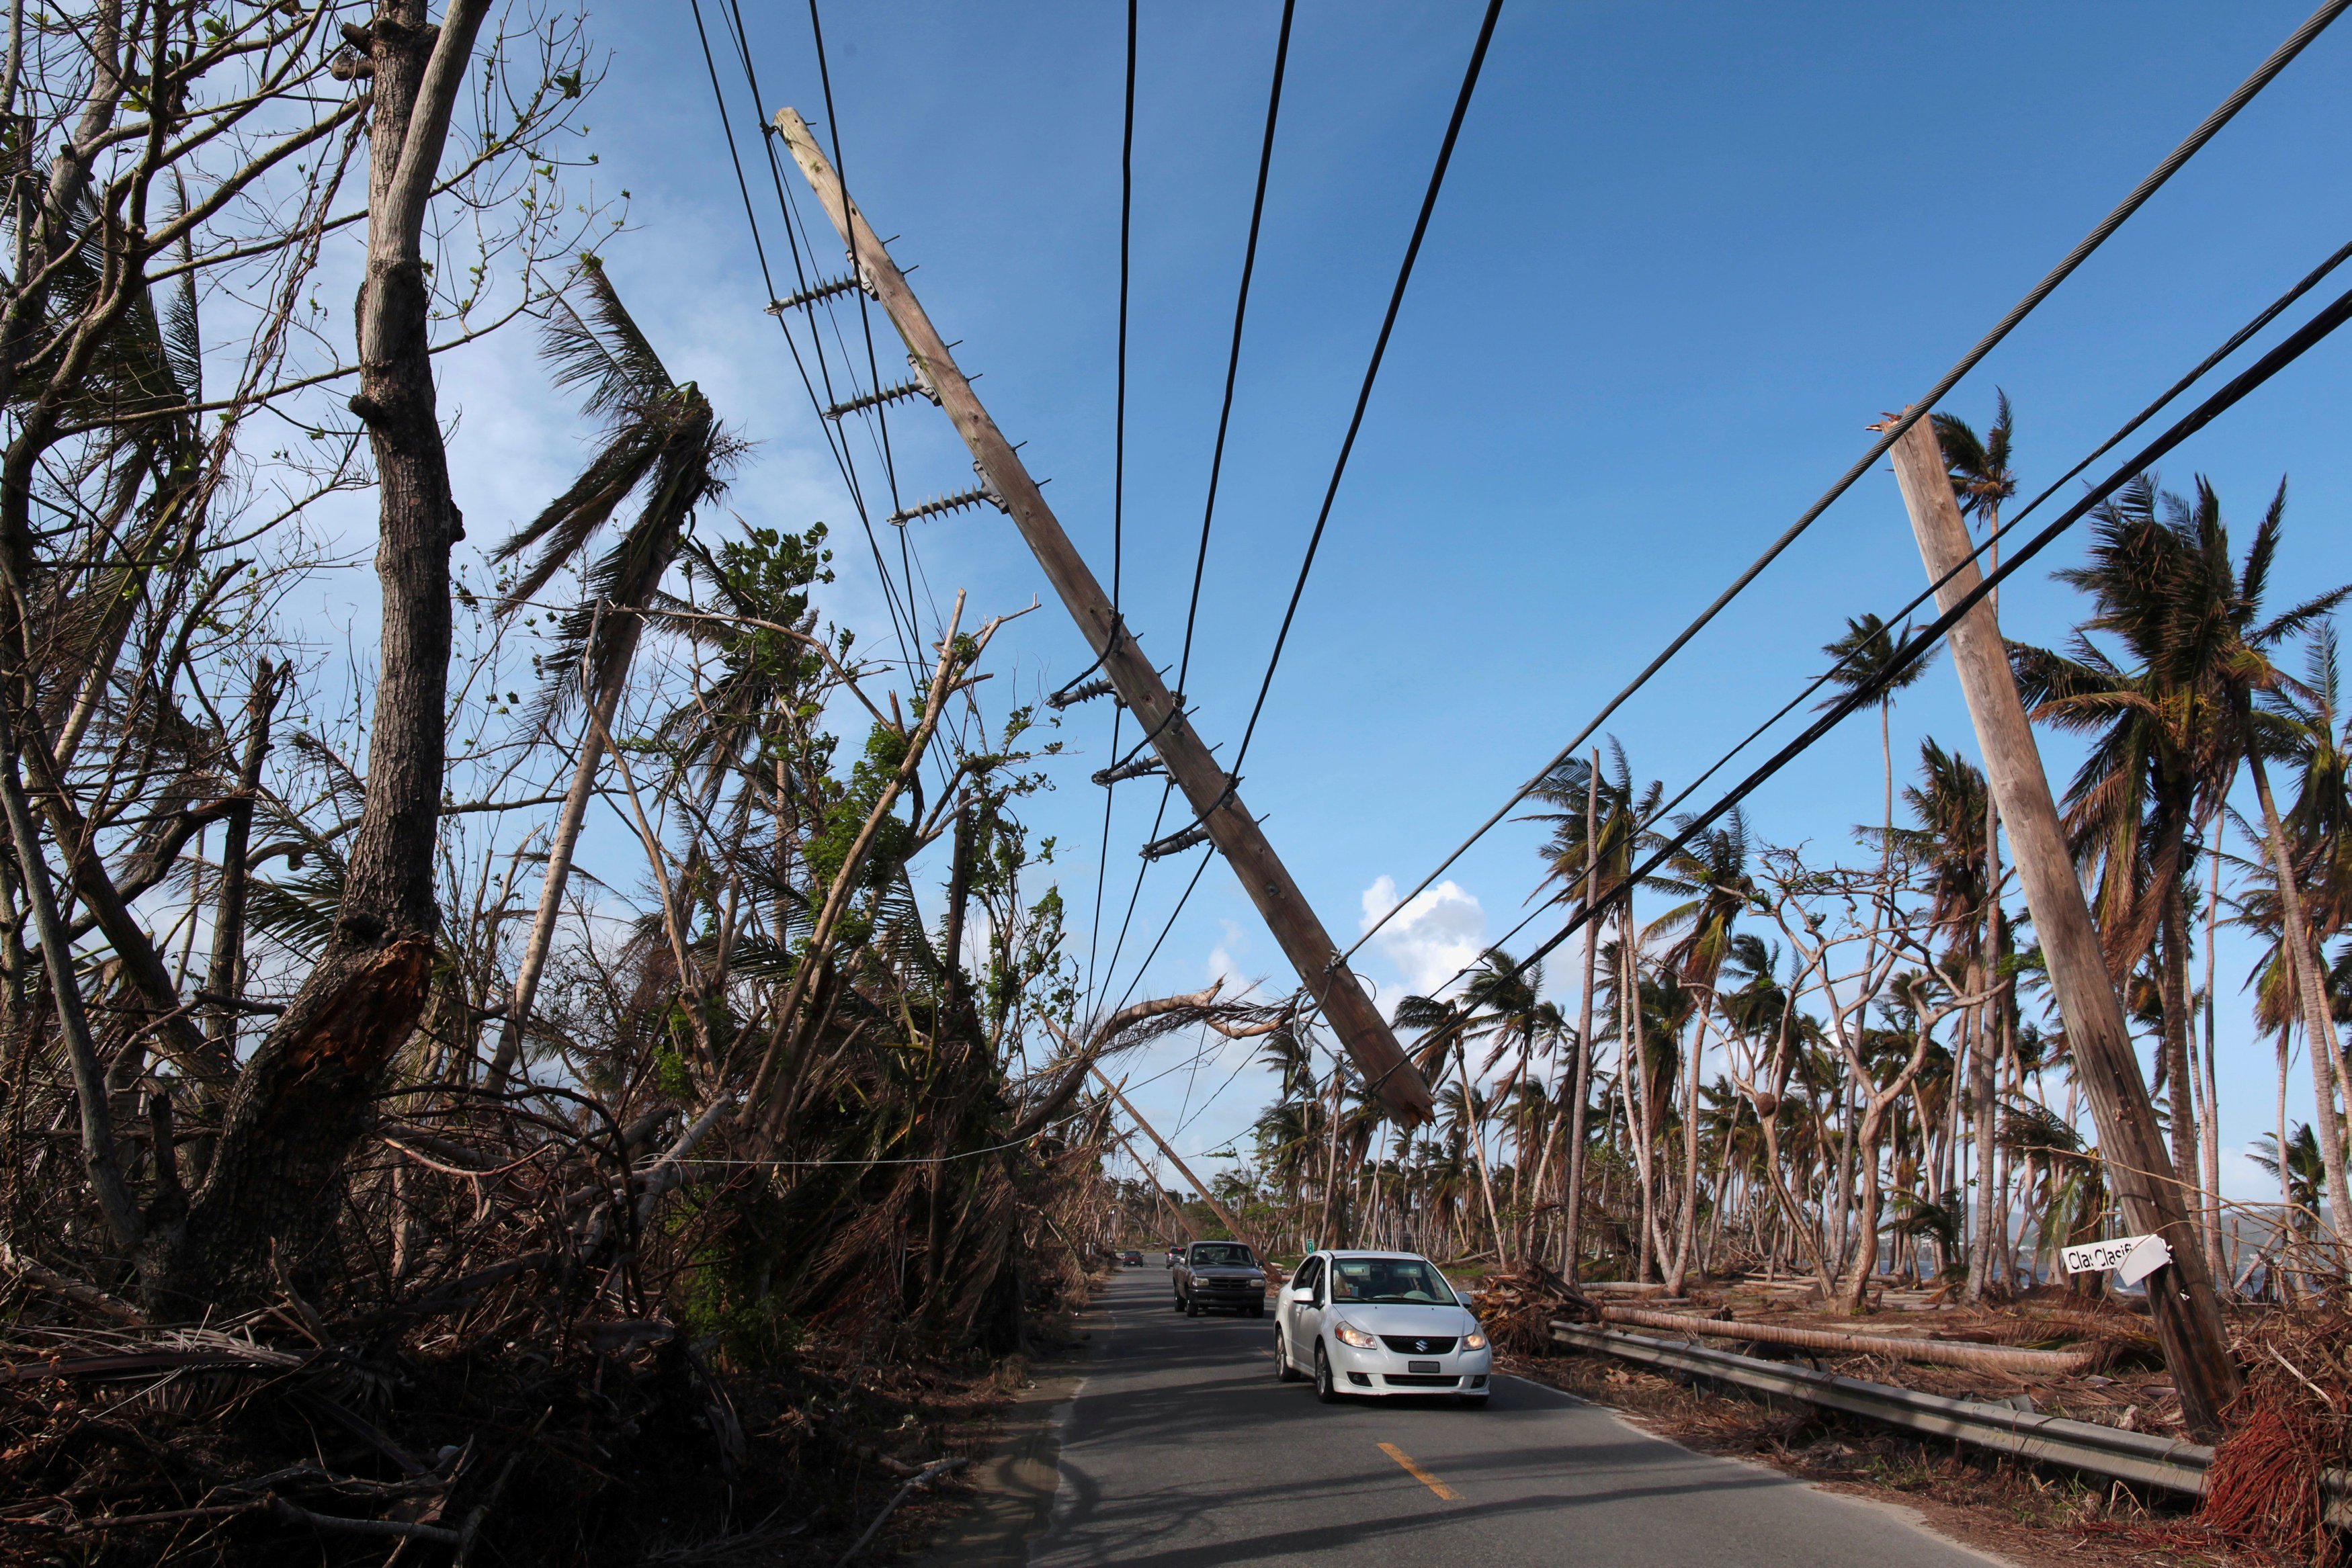 Naufragio capoc Exclusivo Why Is Puerto Rico Still Without Power? - MCFA